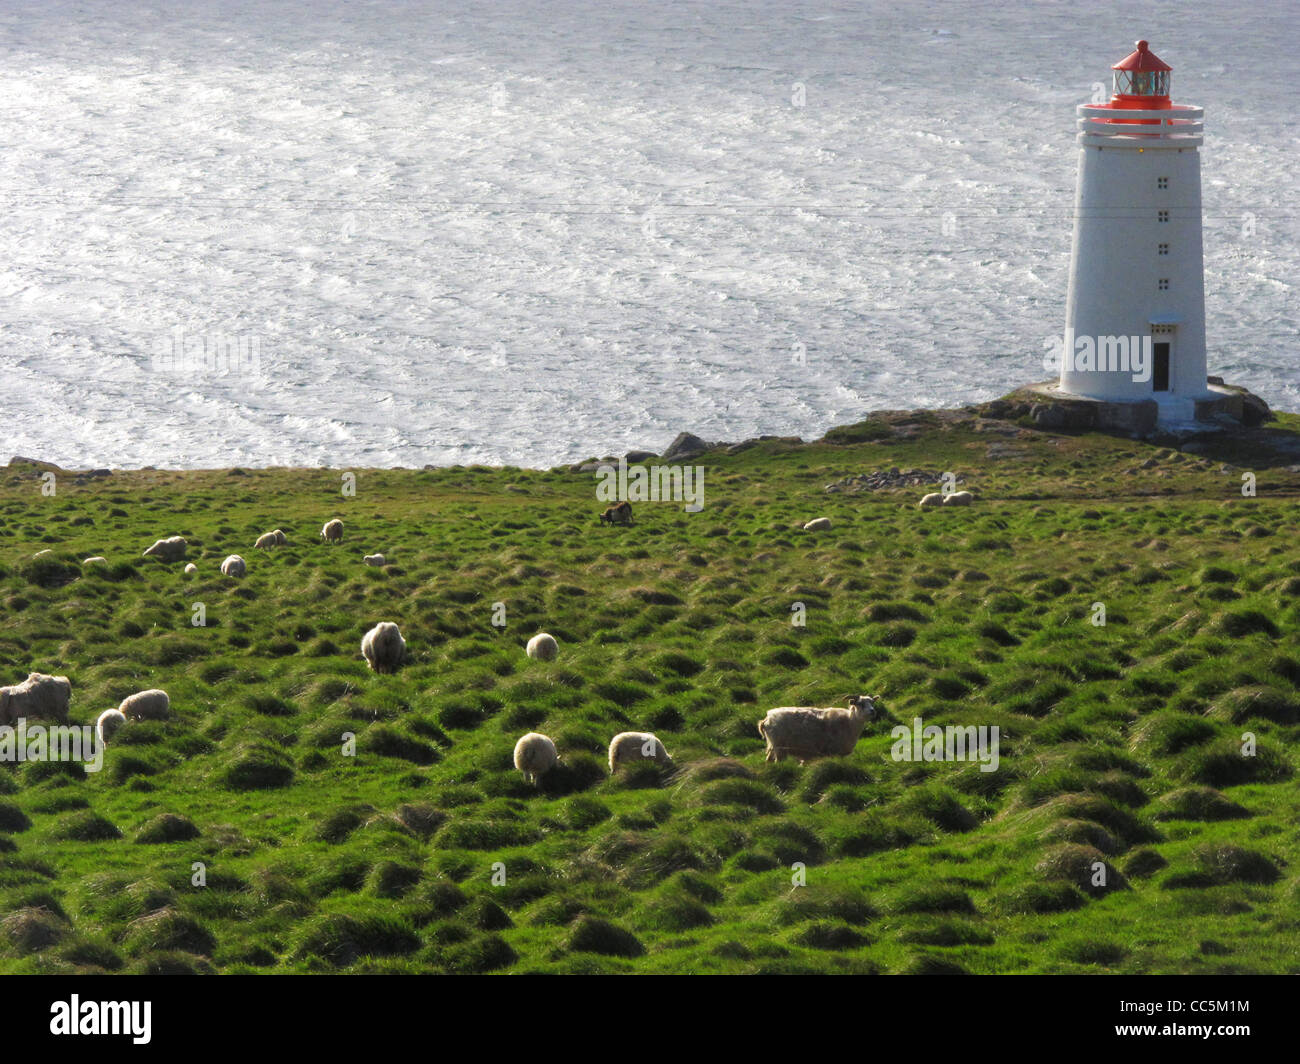 Sheep grazing in foreground and a small Icelandic lighthouse in background. Hvammstangi, Vatnsnes peninsula, Northern Iceland. Stock Photo